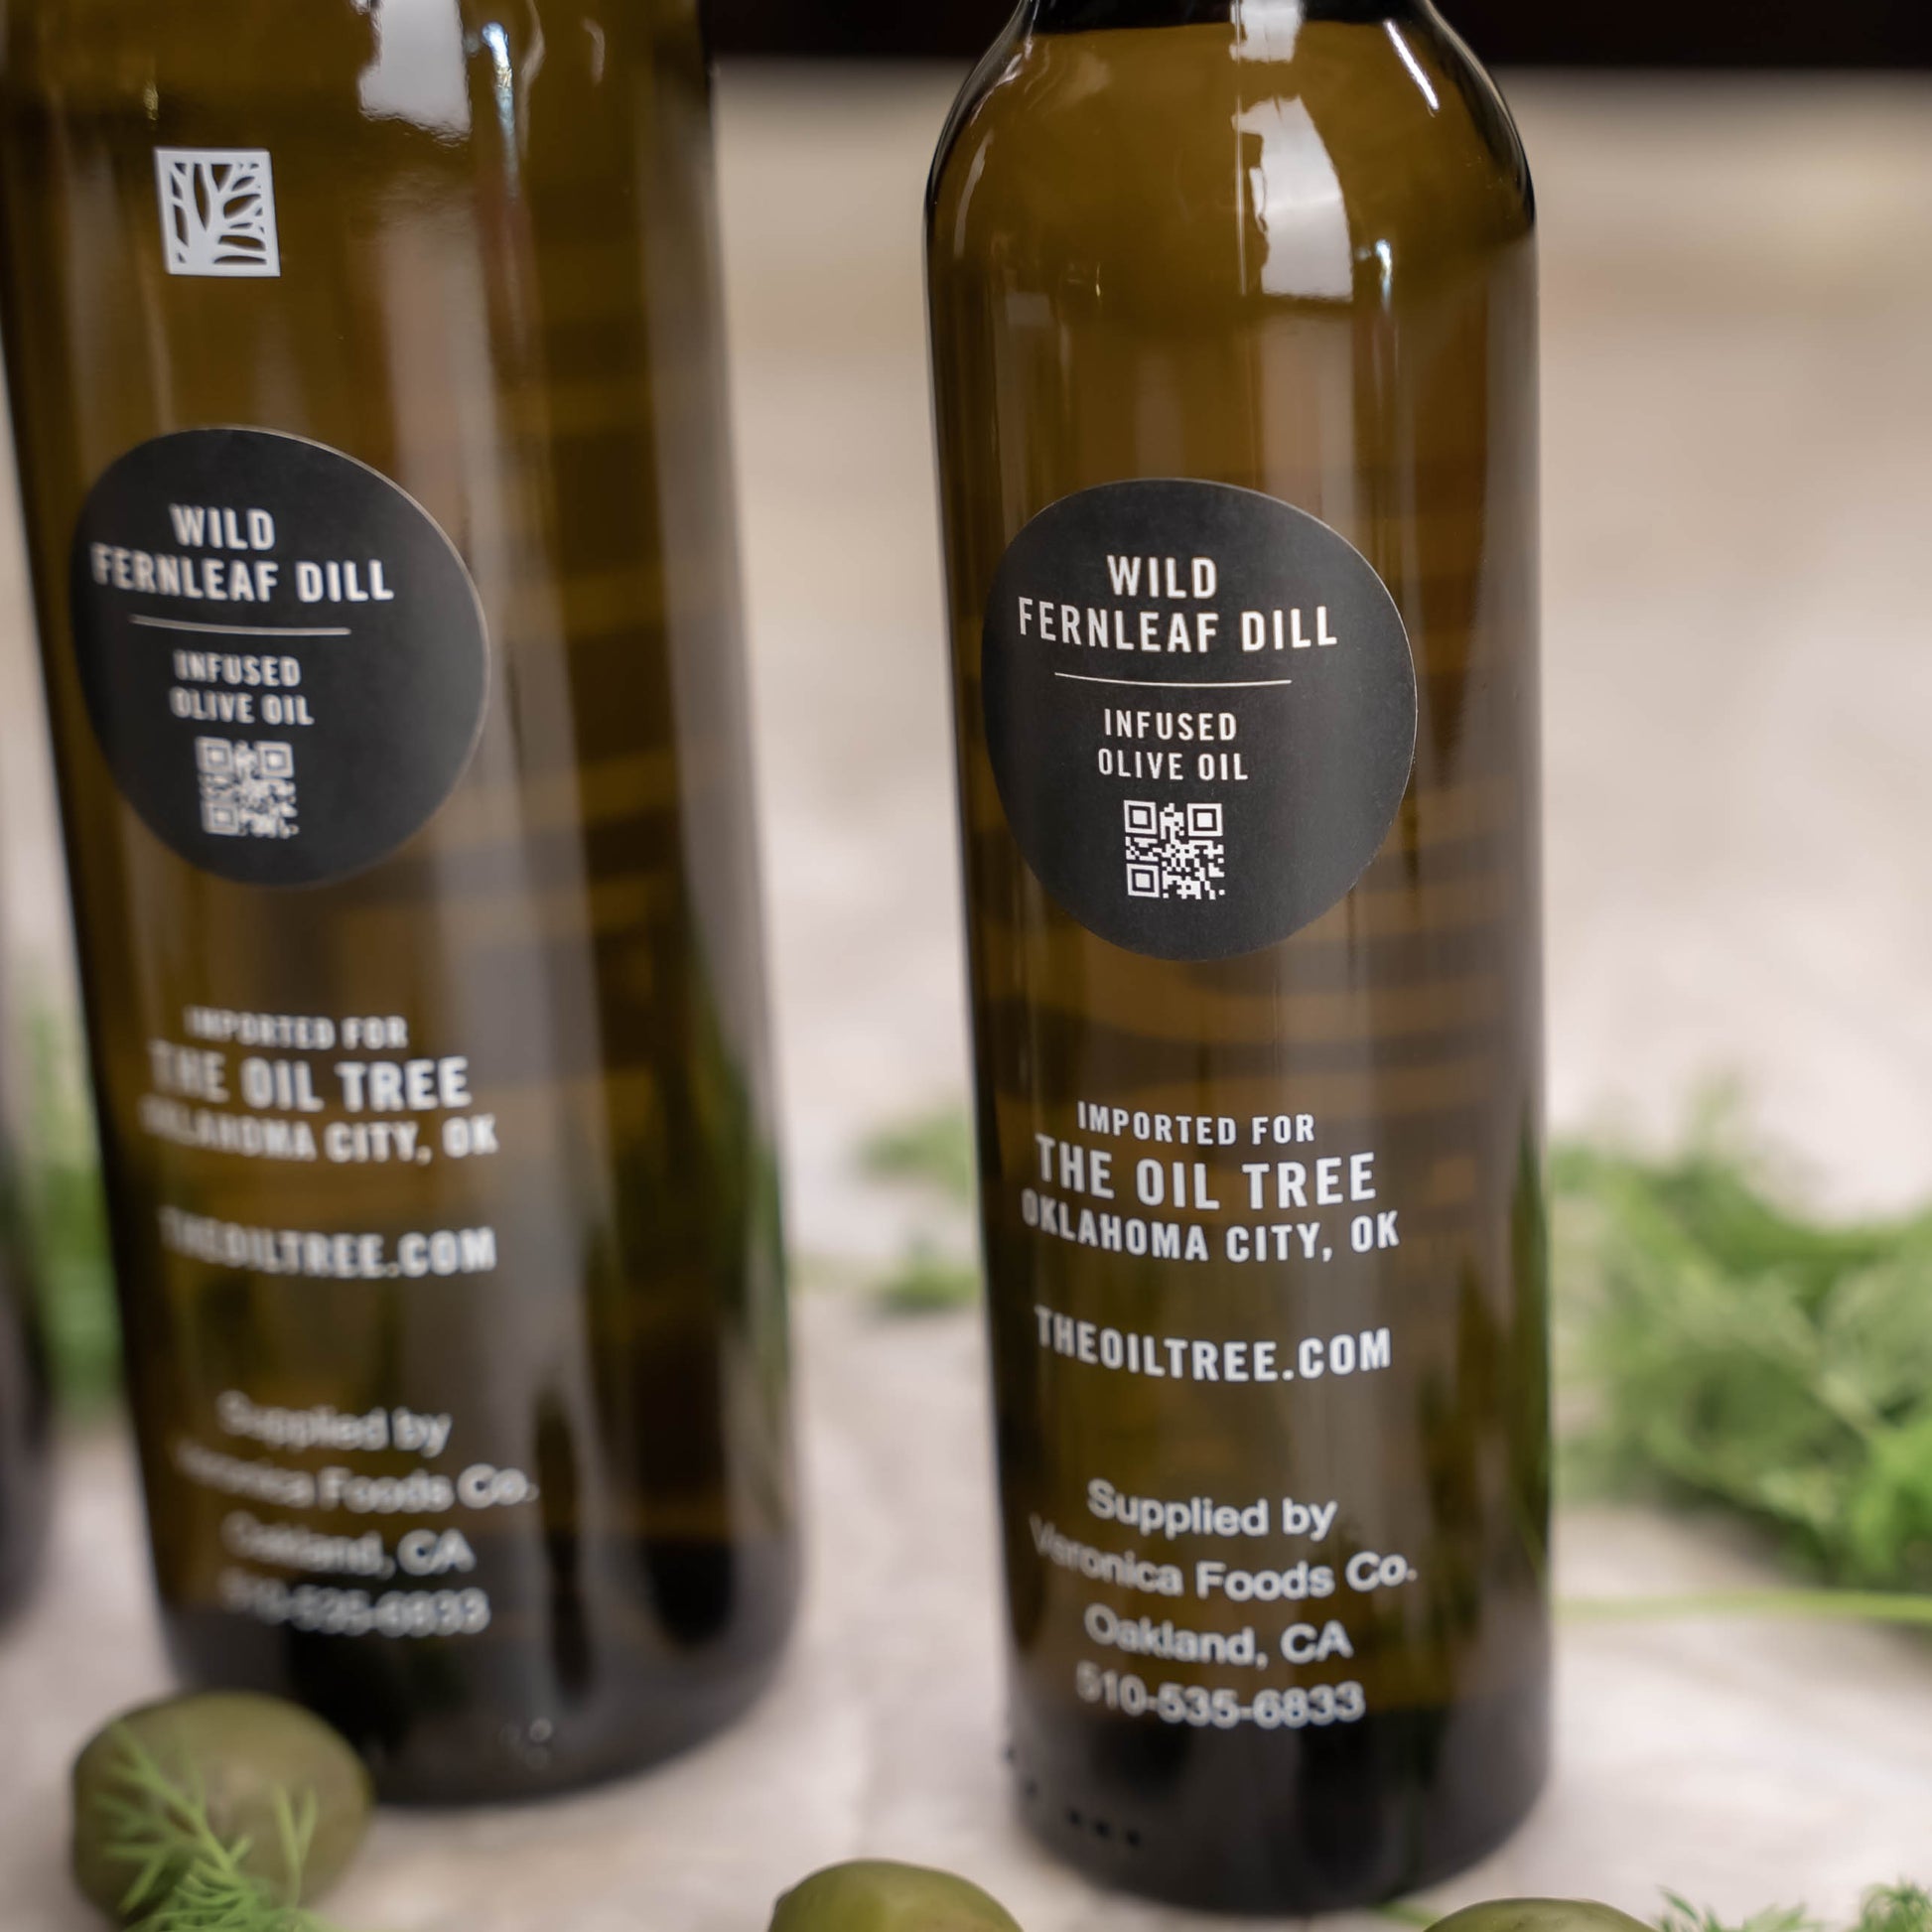 wild fernleaf dill infused olive oil